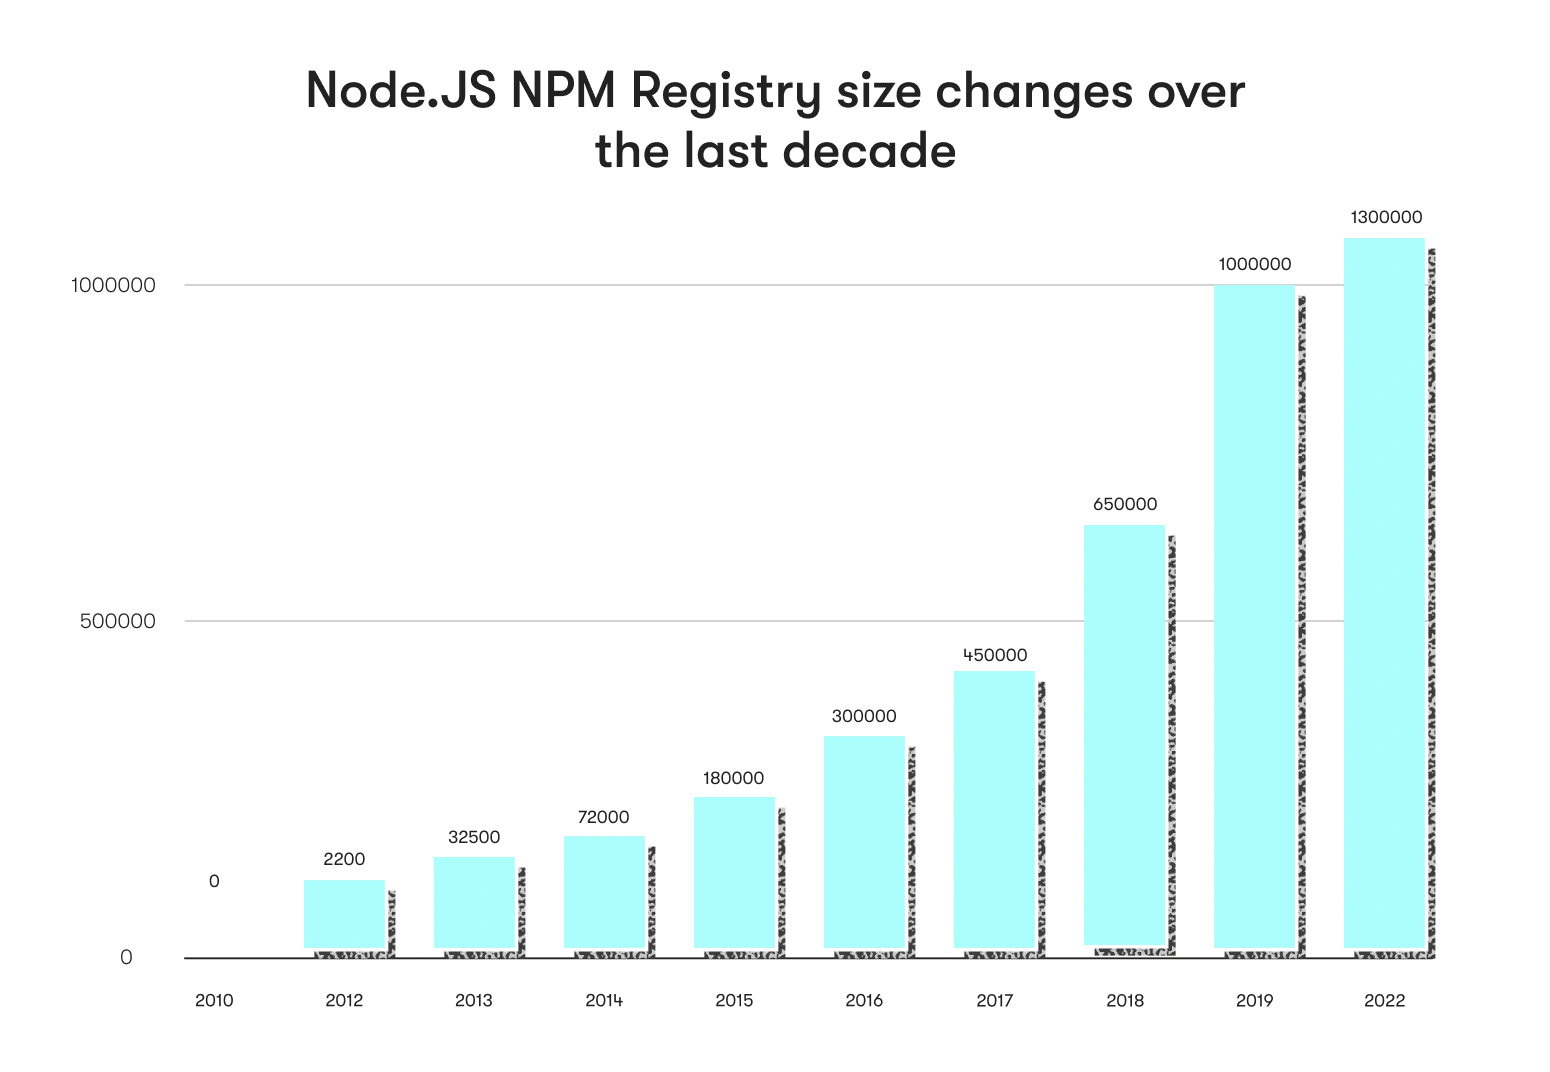 Node.js NPM packages number from 2010 to present